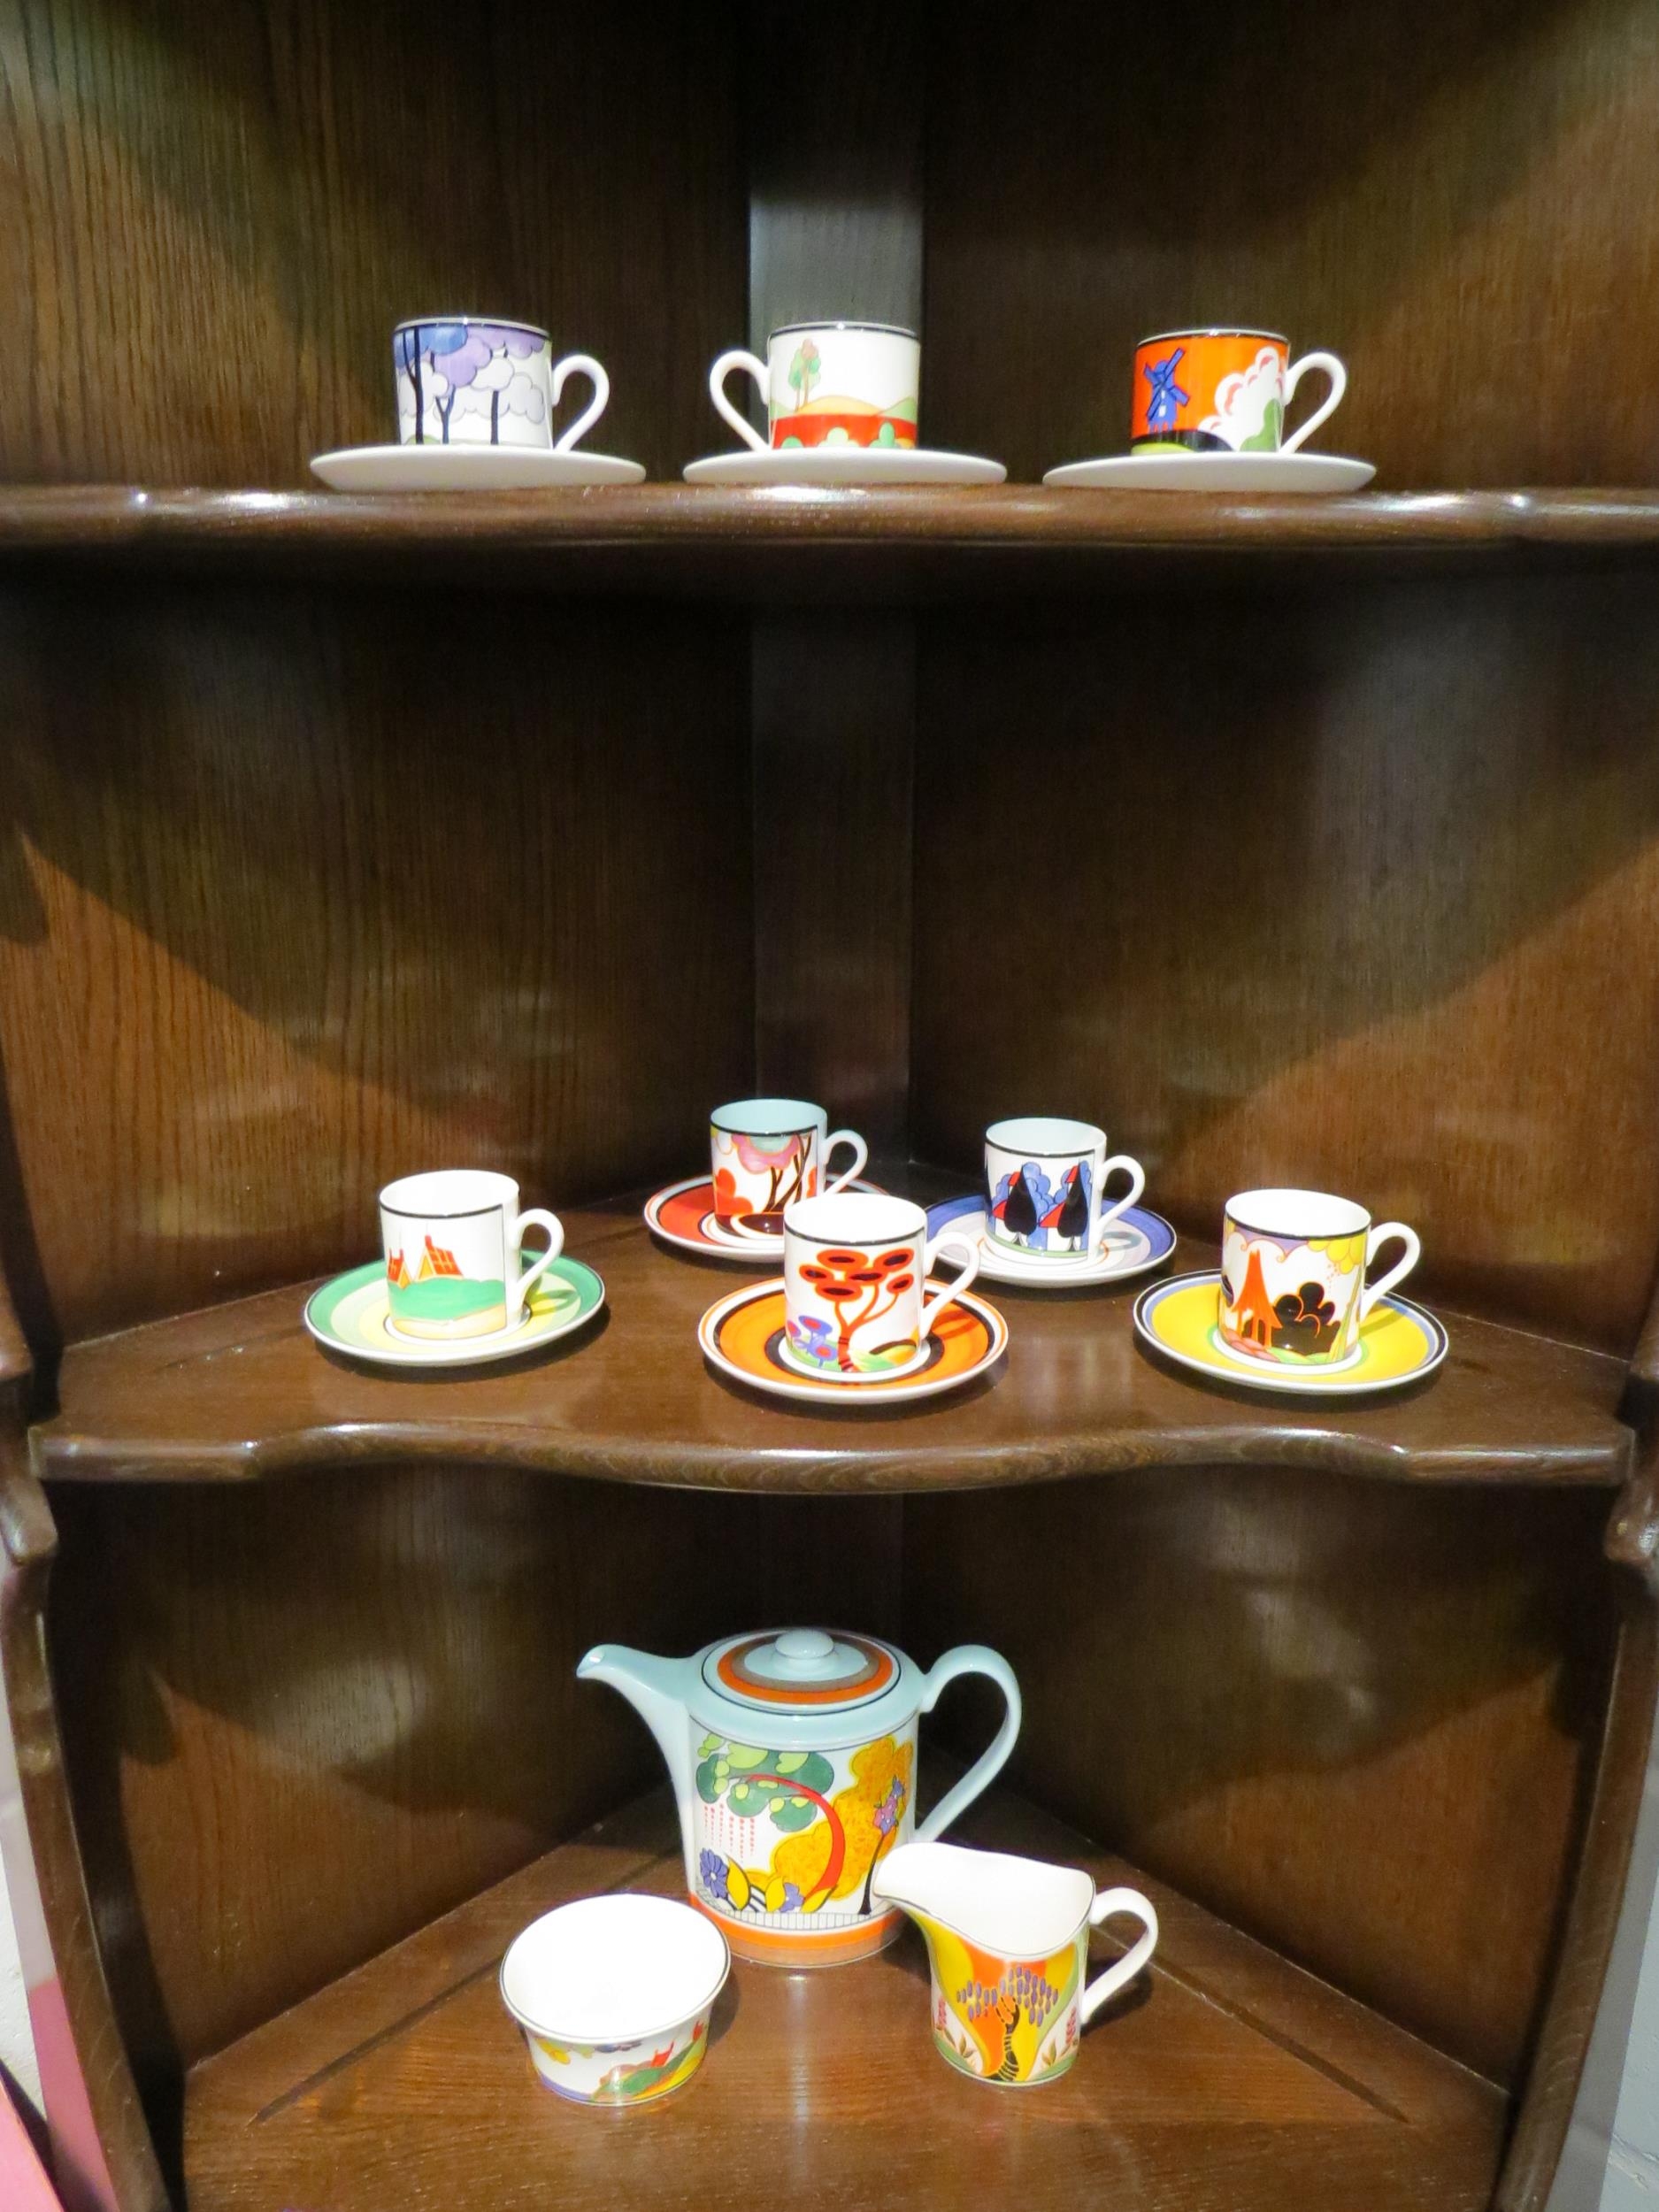 A Wedgwood Clarice Cliff harlequin coffee set consisting of coffee pot, sucrier, milk jug and